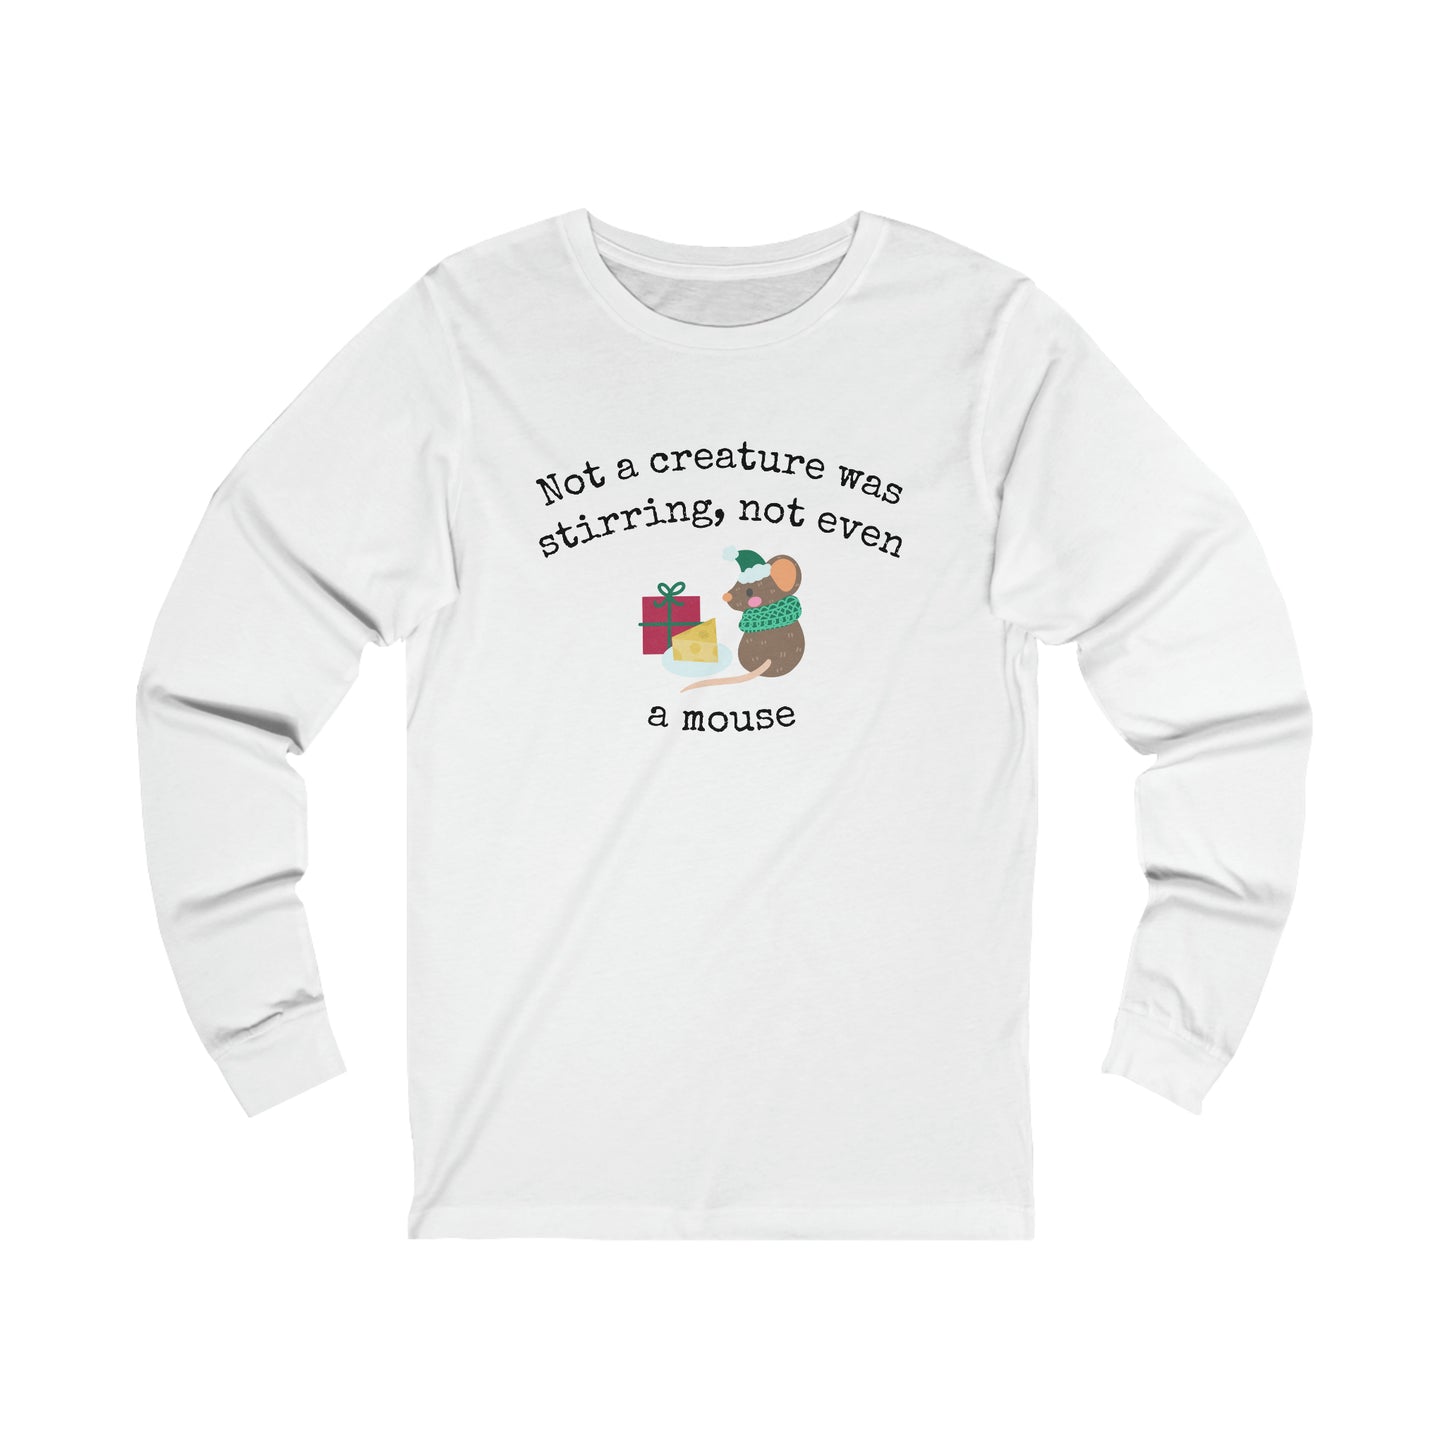 Unisex Jersey Long Sleeve Tee, Christmas Shirt, "Not a creature was stirring, not even a mouse"